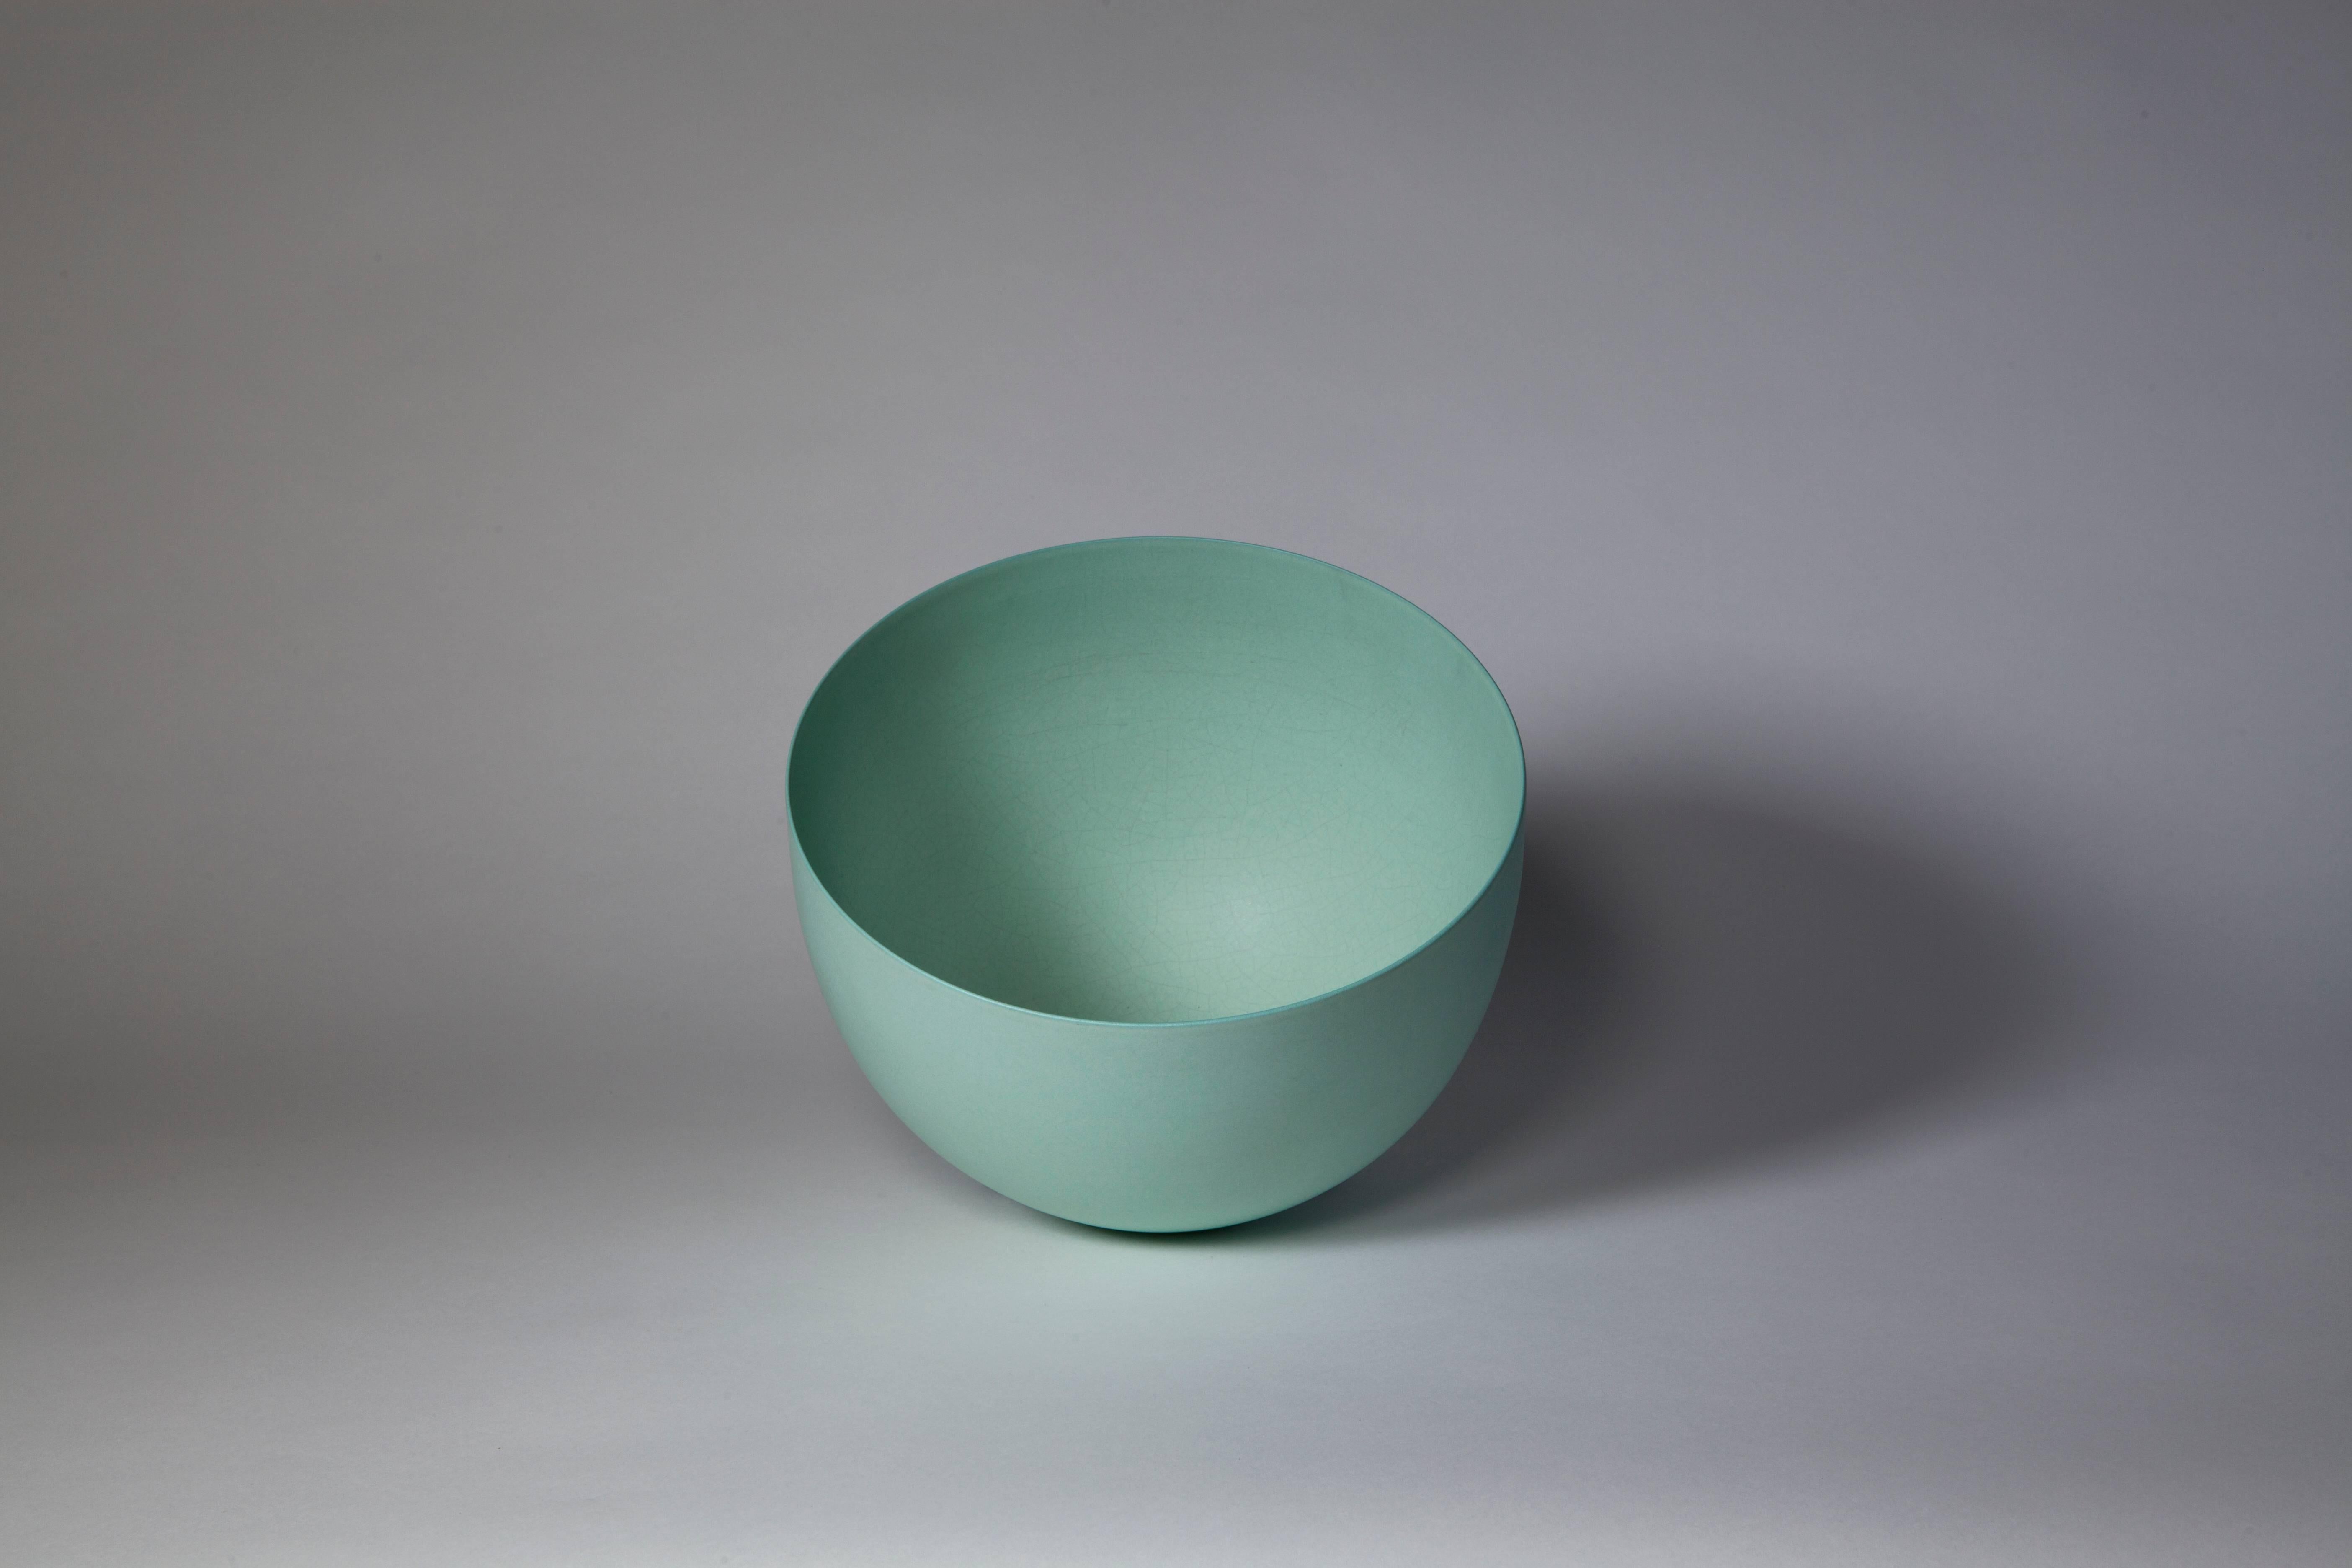 Minimalist Light Green Bowl, Stoneware with Terra Sigilata Glaze, One-Off by Geert Lap For Sale